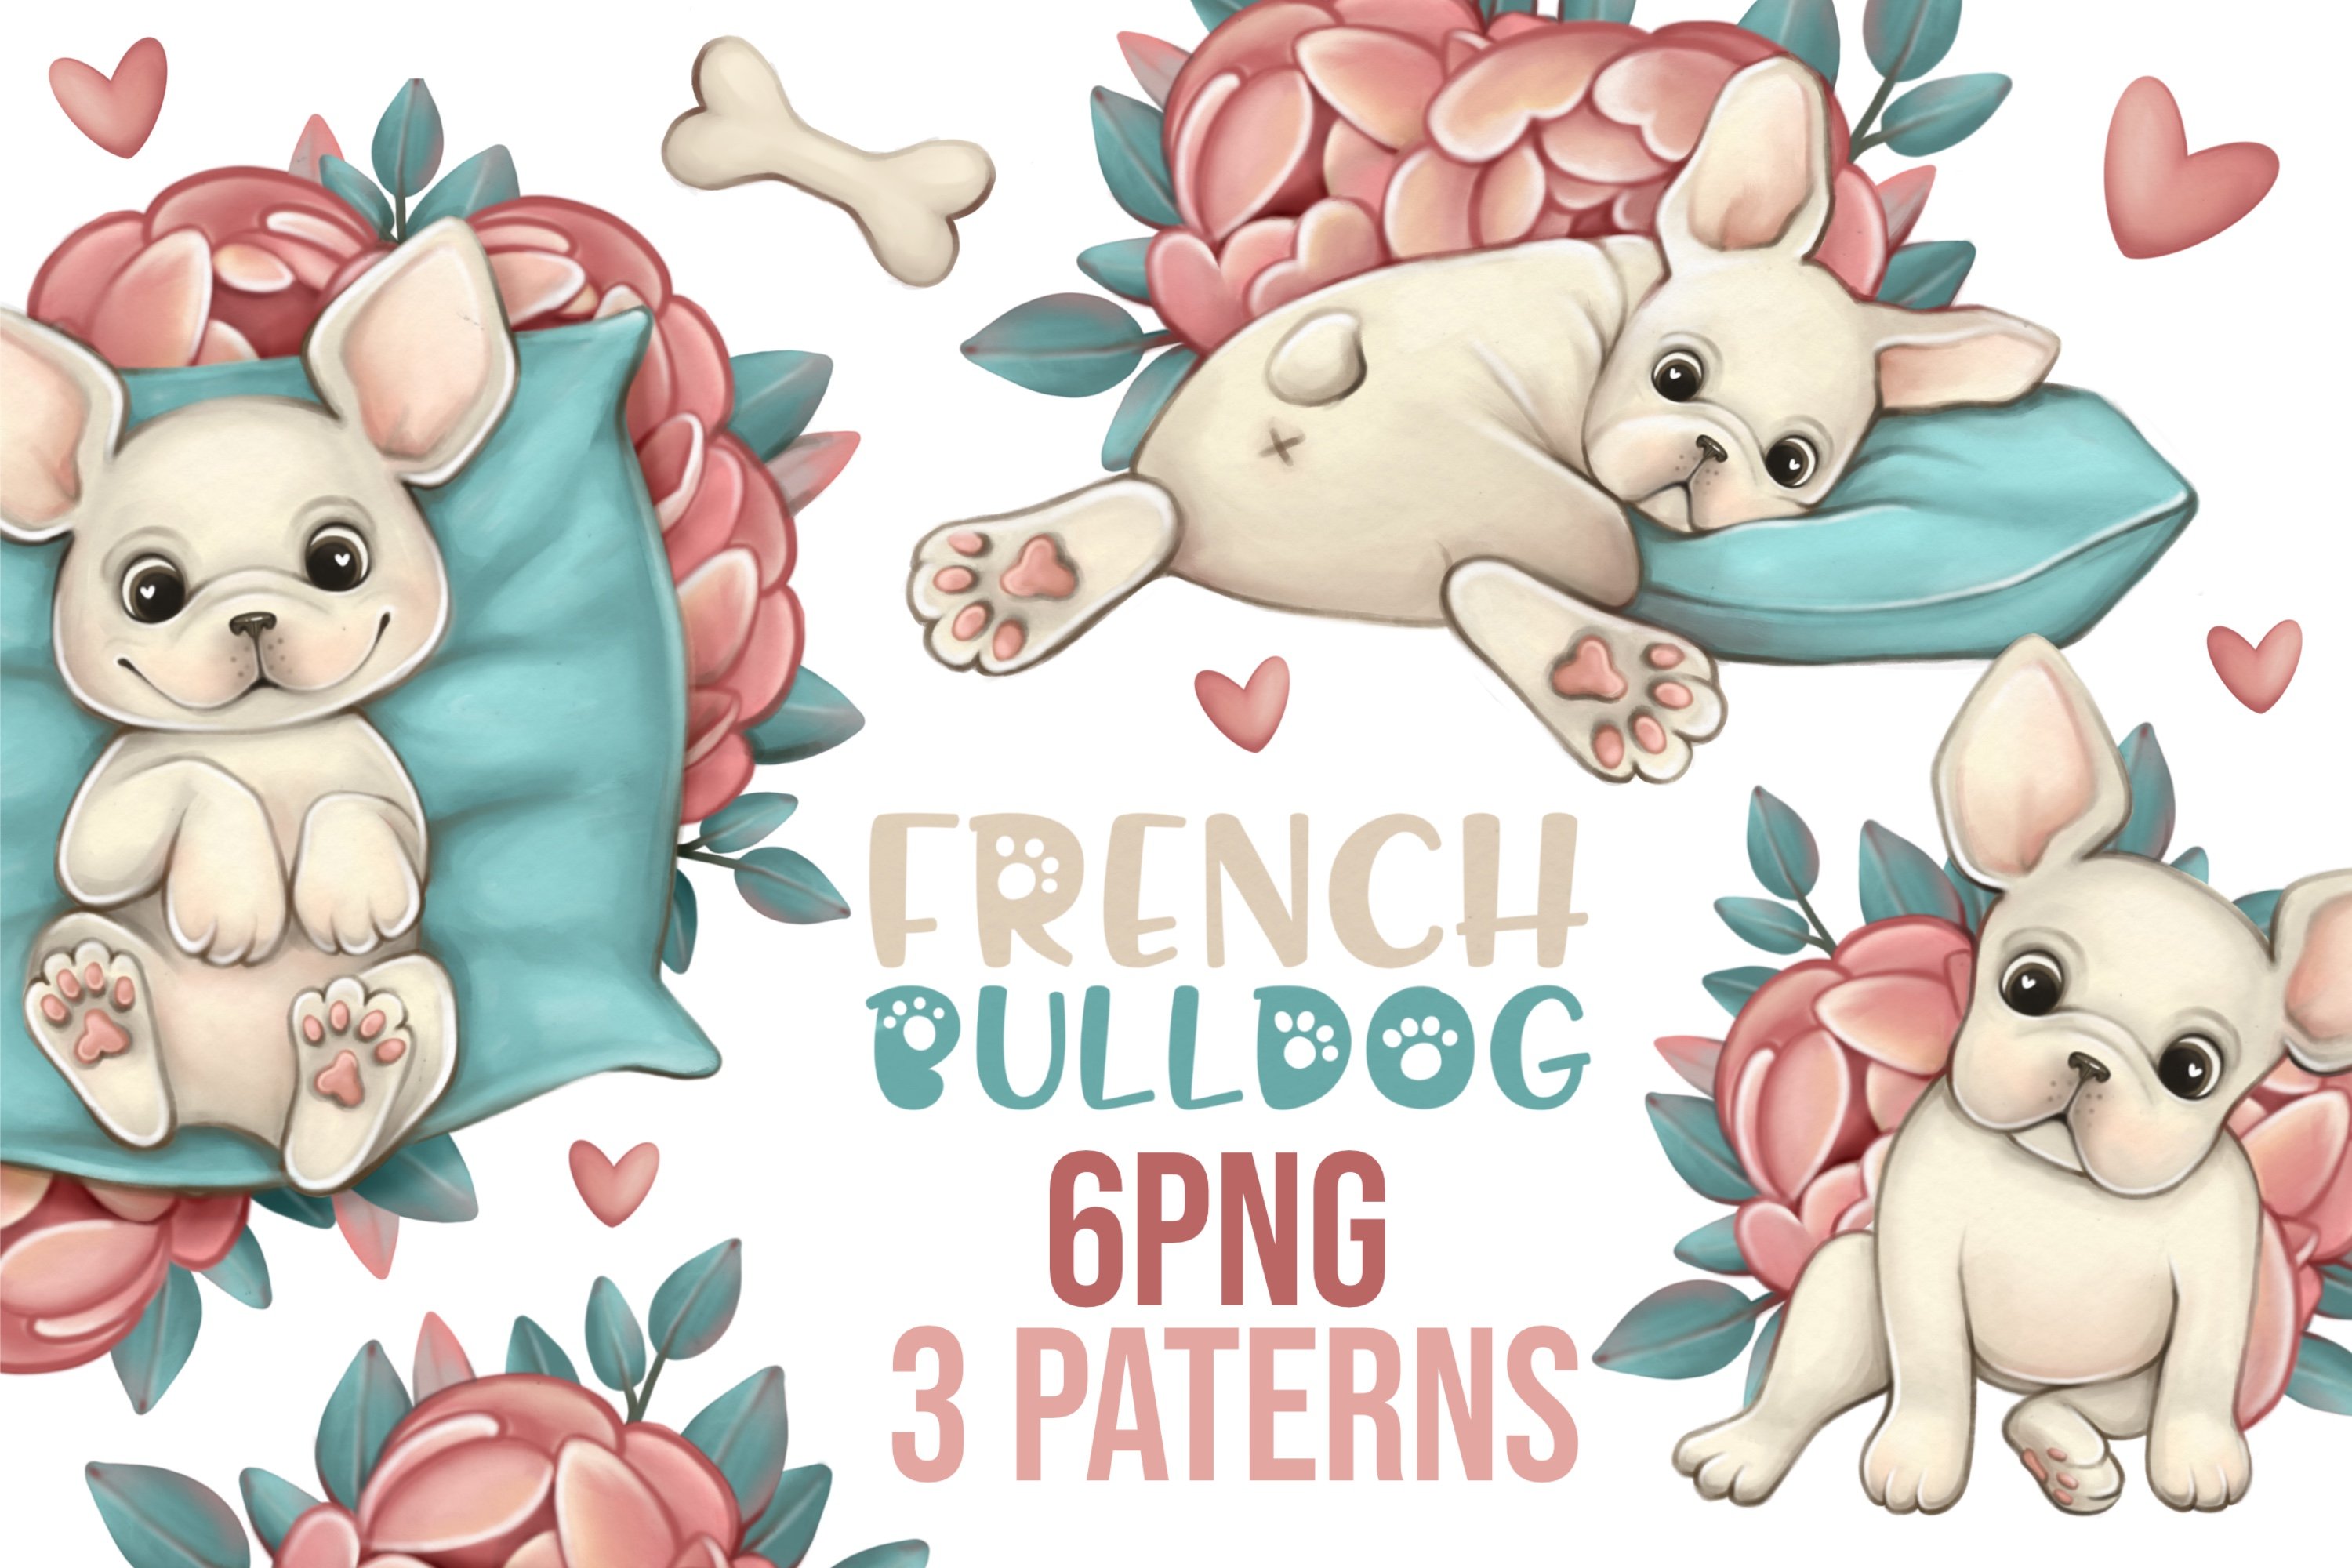 French Bulldog Set and Patterns cover image.